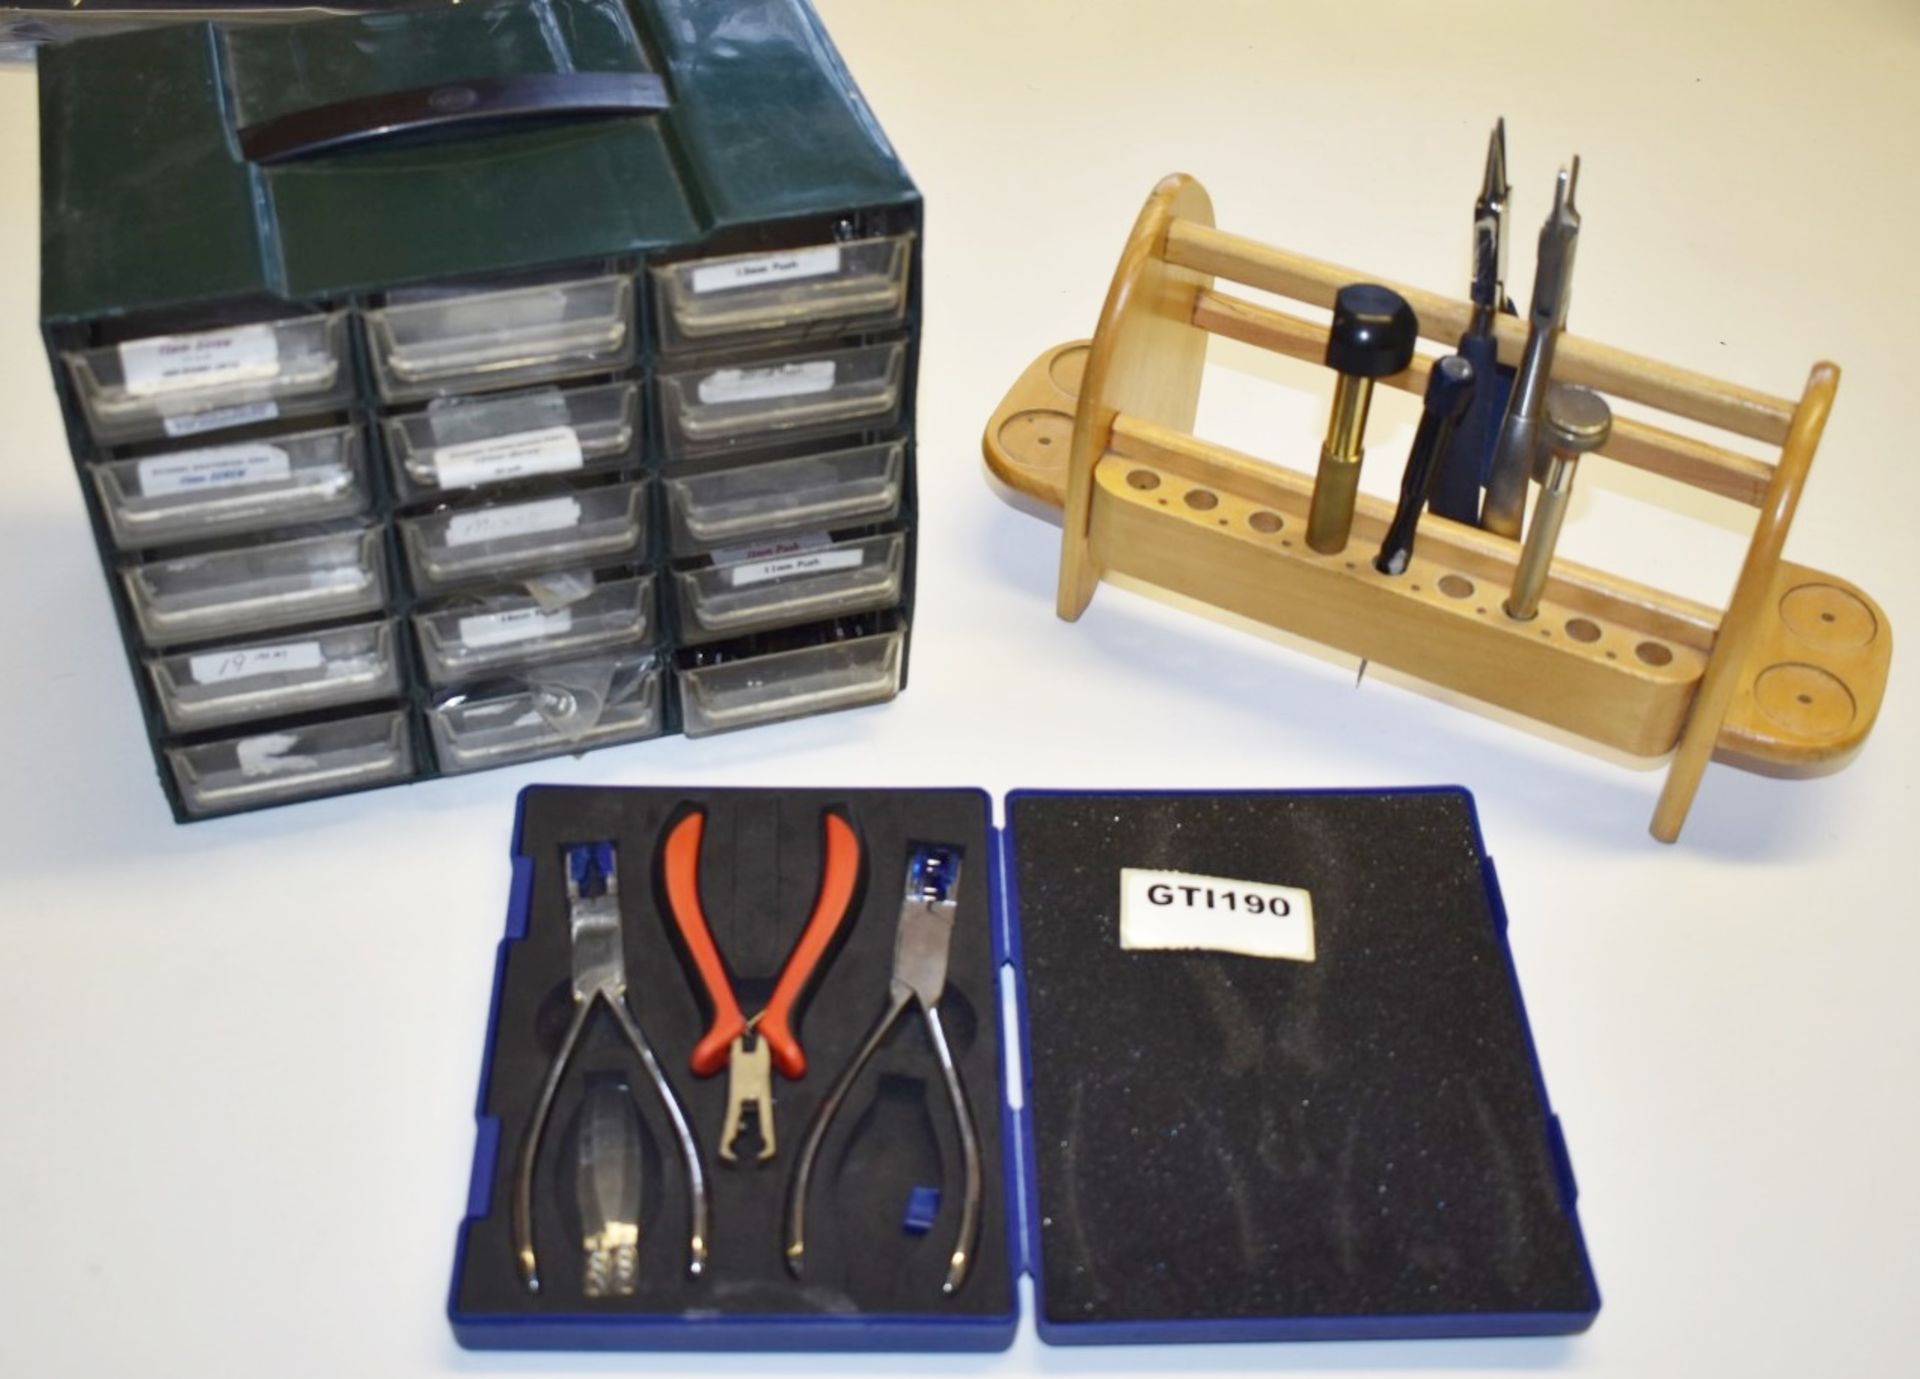 1 x Assorted Collection of Opticians Tools and Accessories - Ref: GTI190 - CL645 - Location: